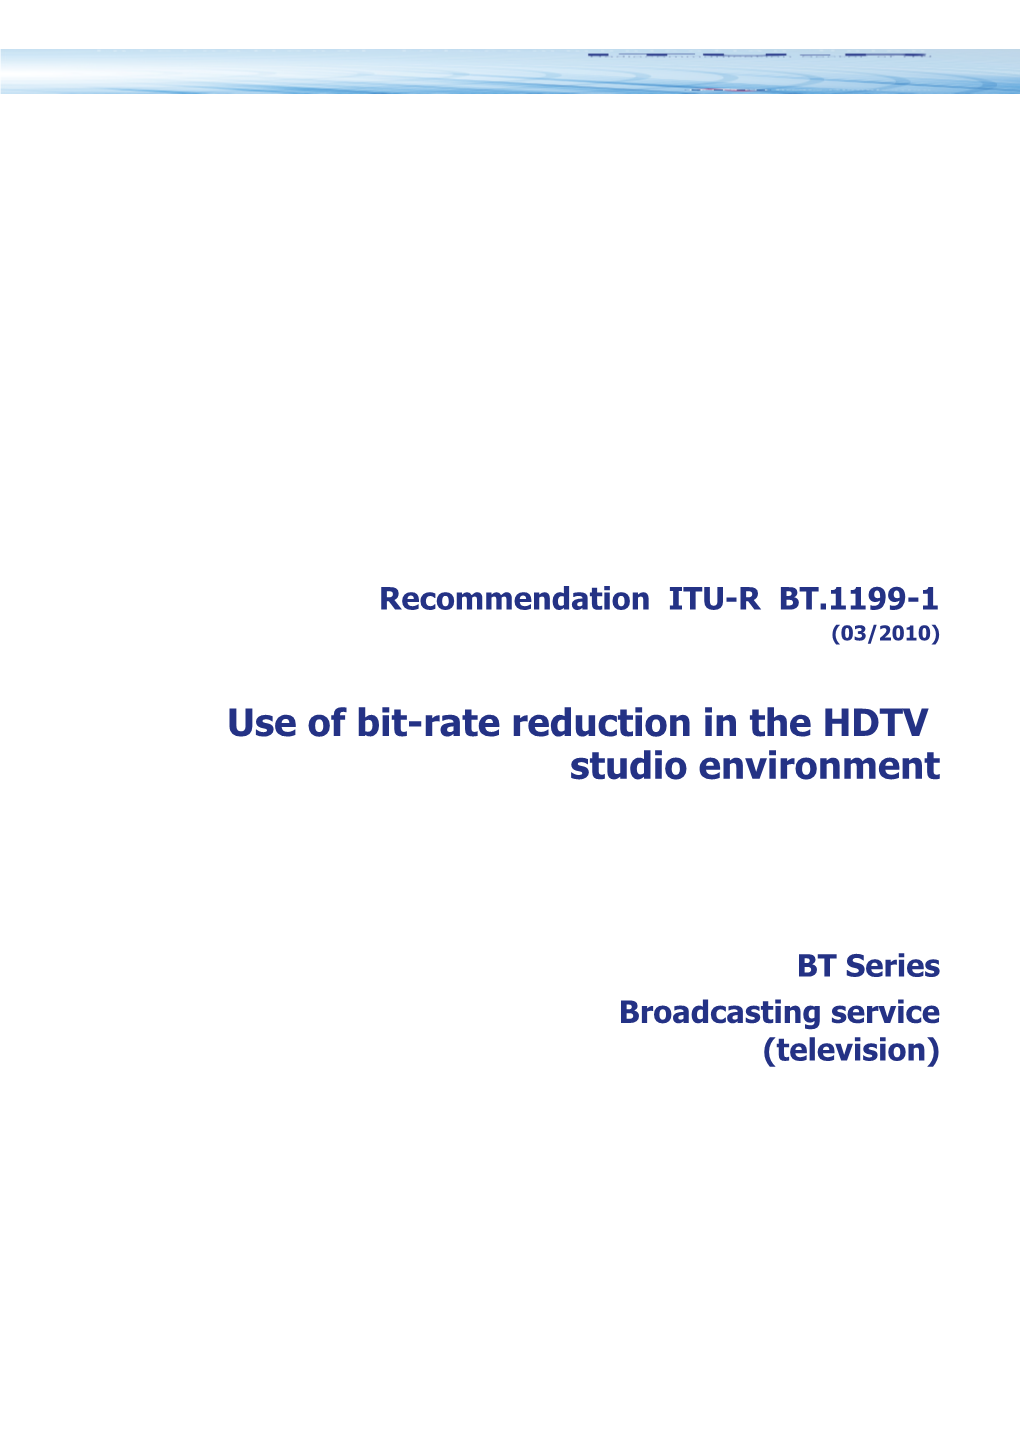 RECOMMENDATION ITU-R BT.1199-1 - Use of Bit-Rate Reduction in the HDTV Studio Environment